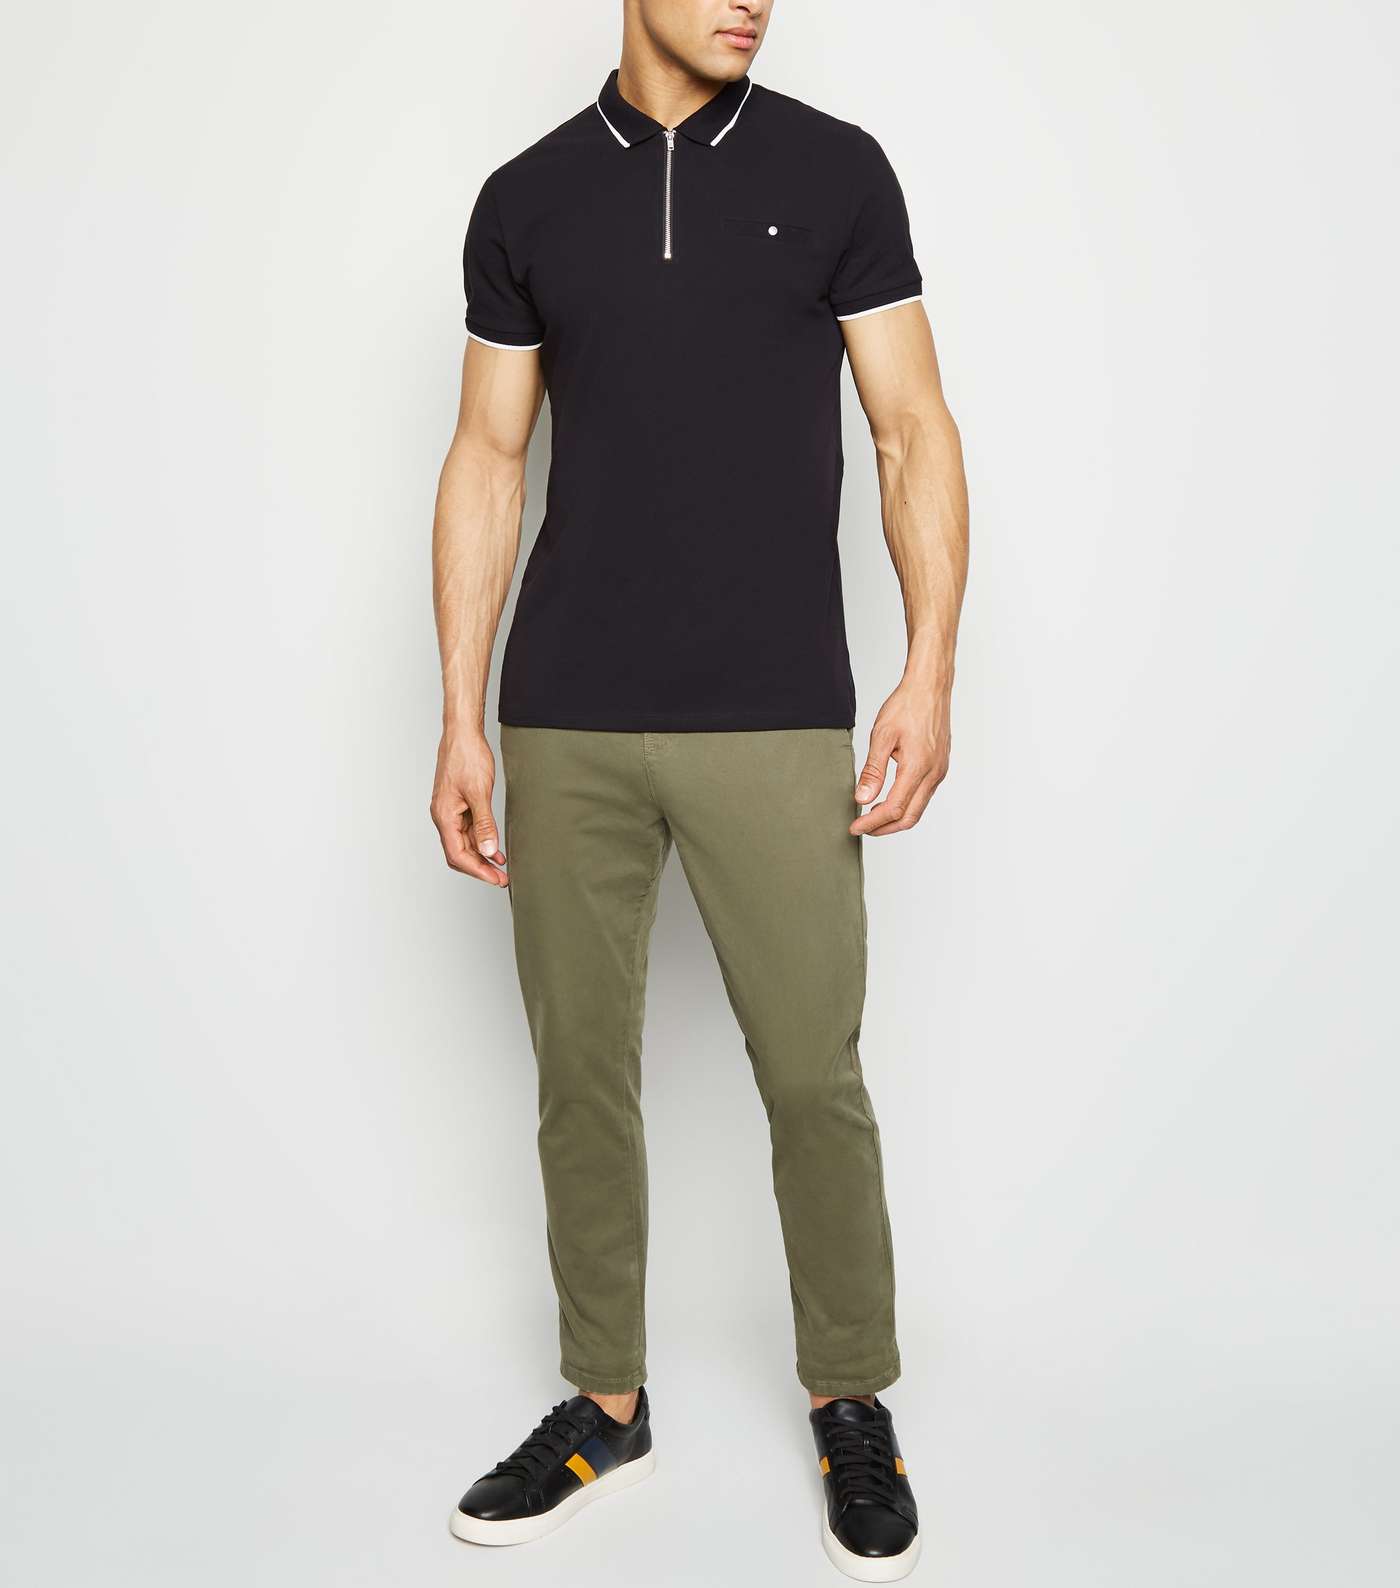 Black Tipped Zip Front Polo Shirt Image 2